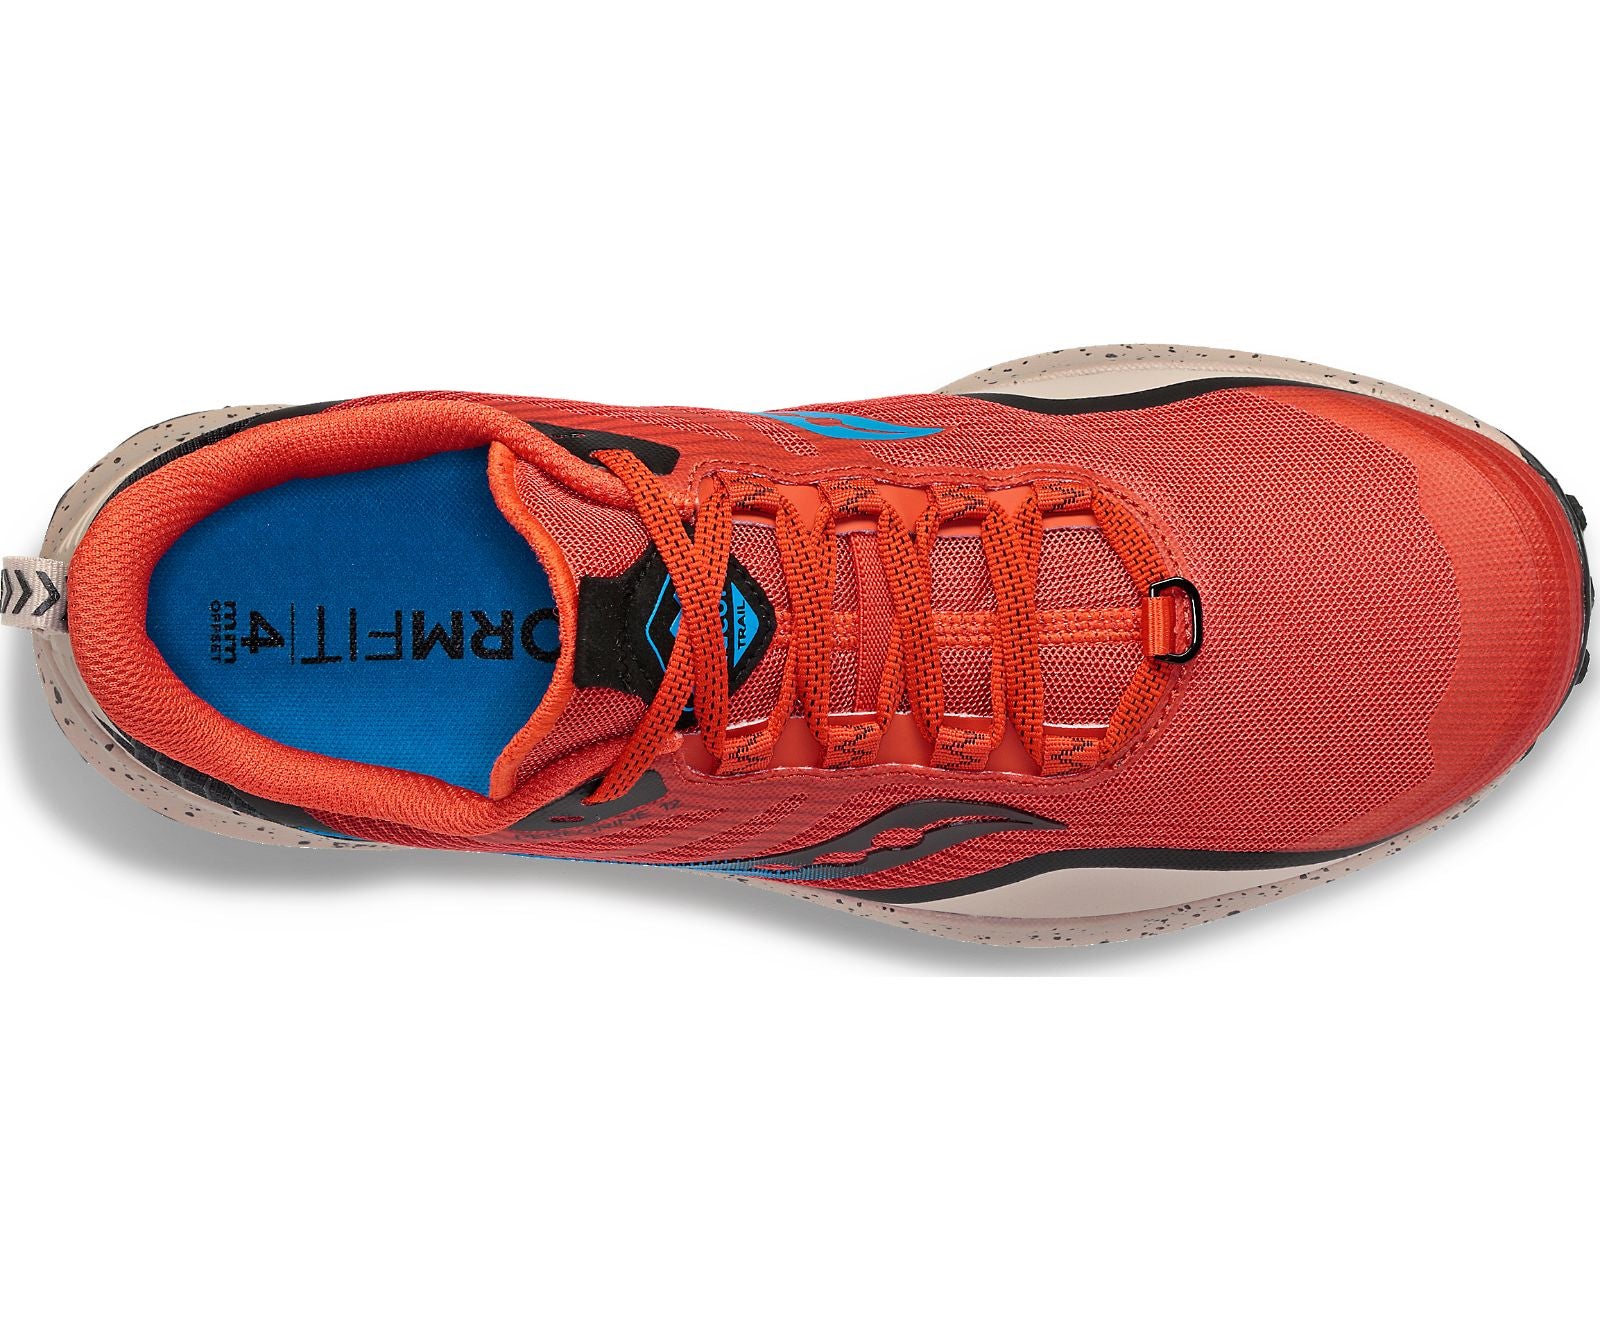 Top view of the Men's Peregrine 12 trail shoe by Saucony in the color Clay/Loam